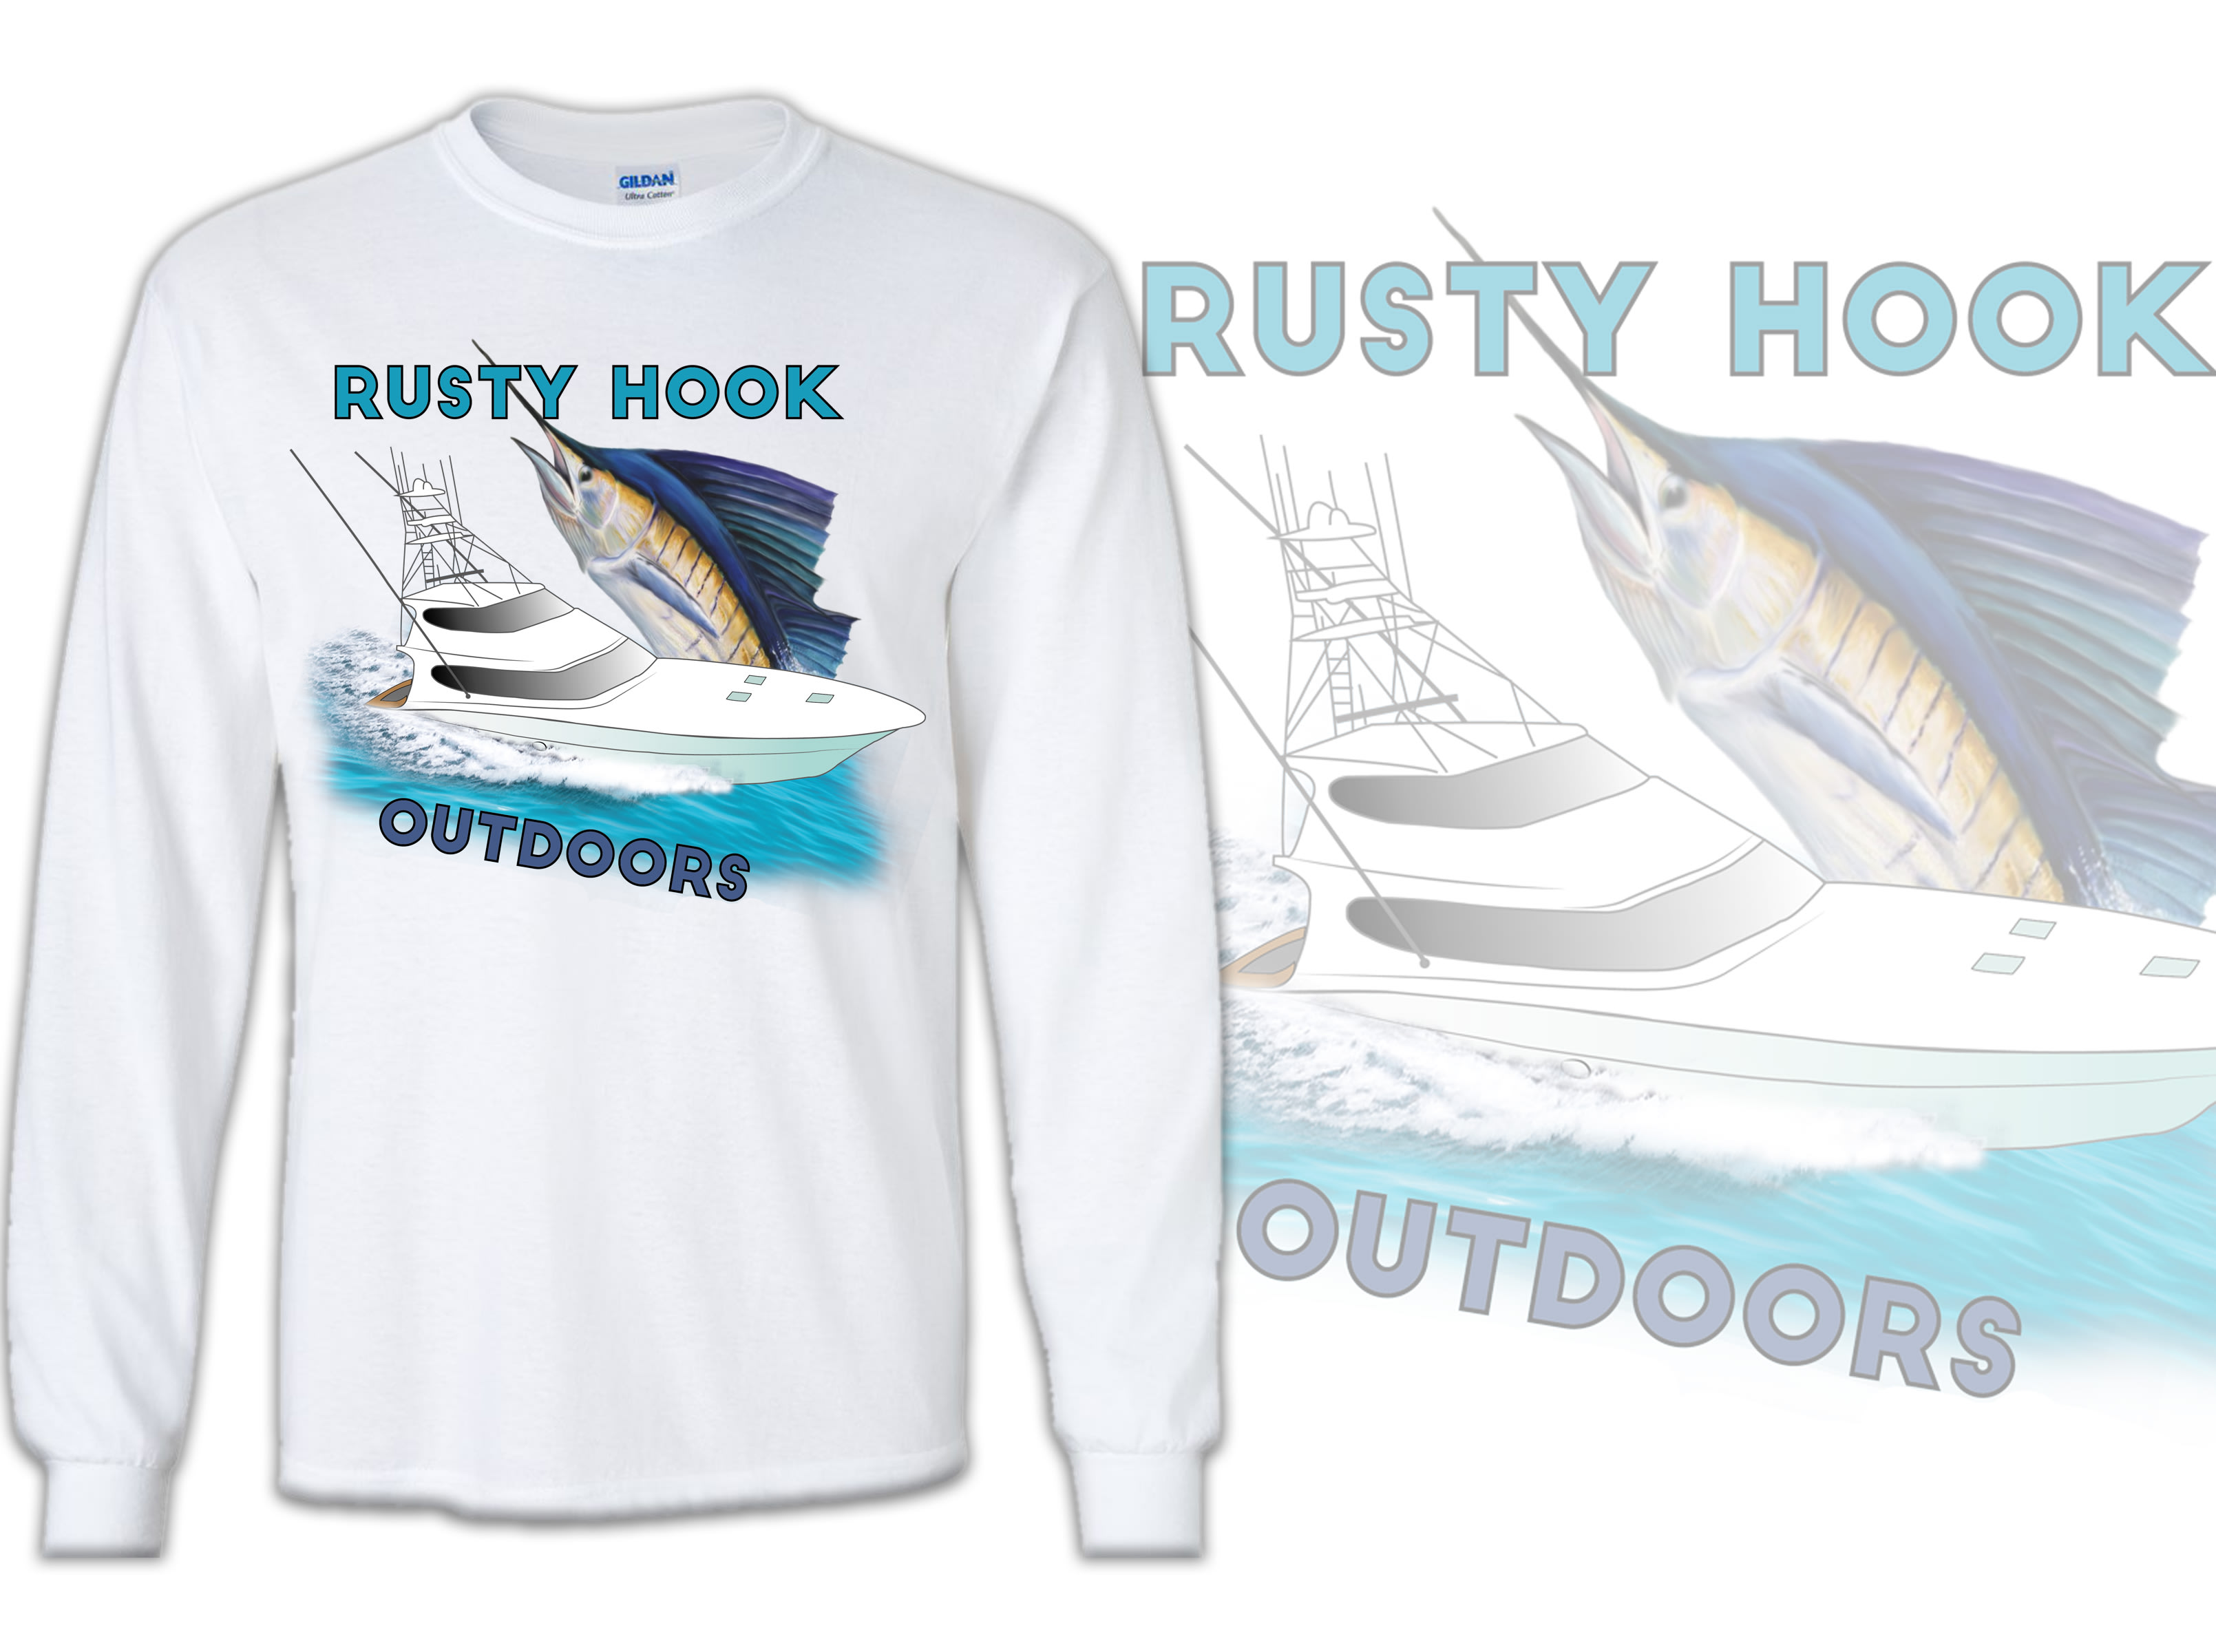 Design an amazing fishing tshirt with your idea by Creative_sagor